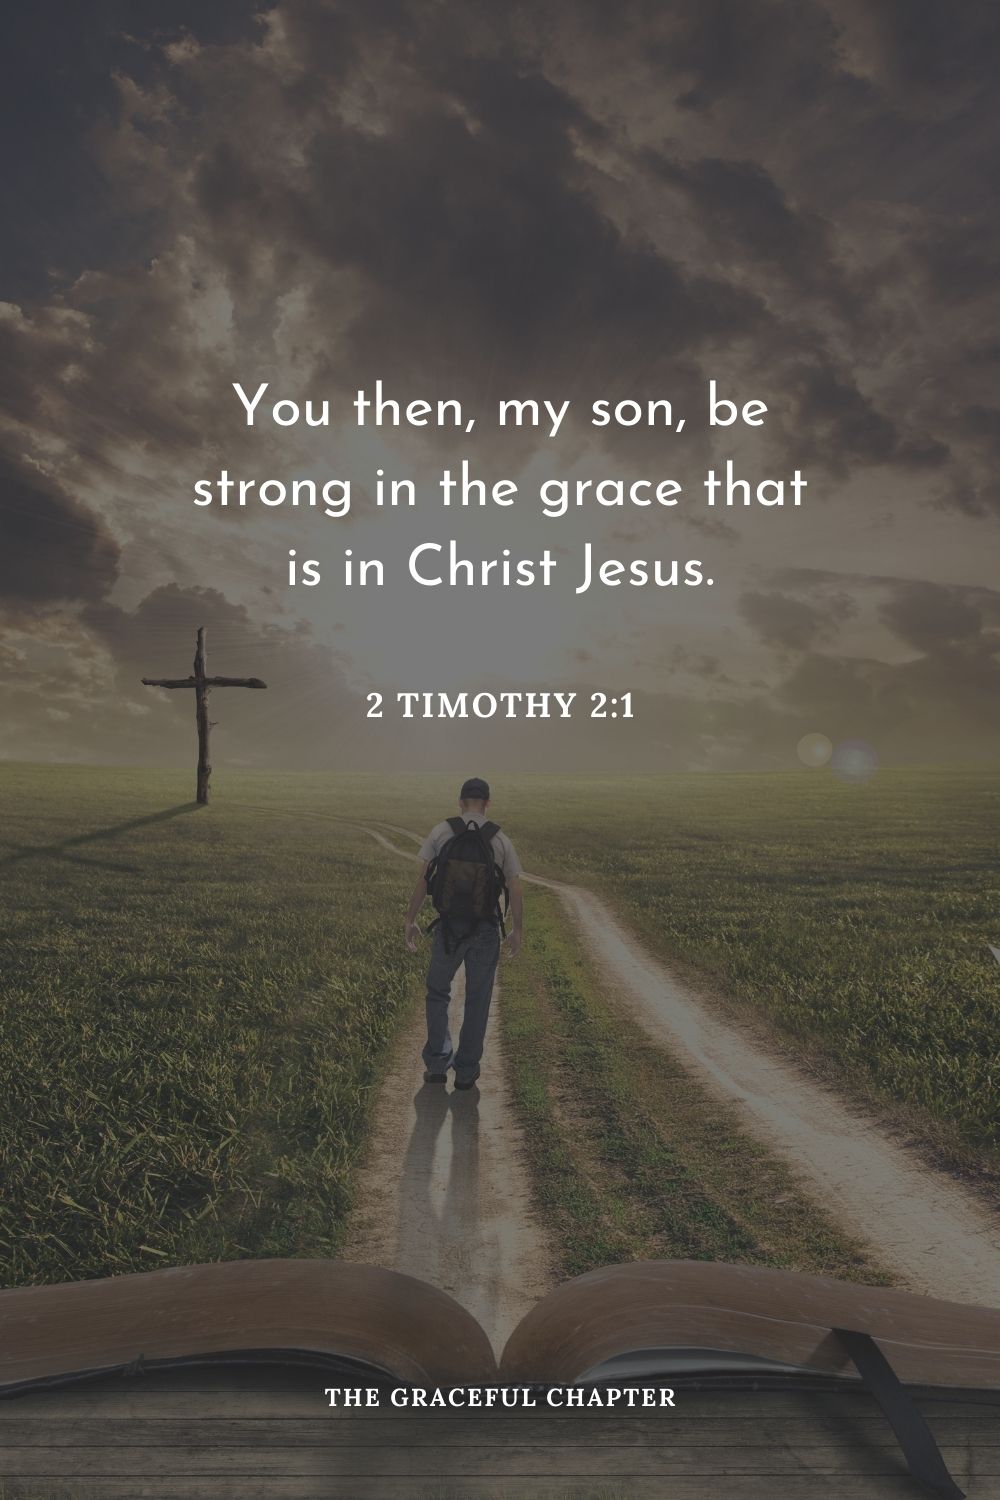 You then, my son, be strong in the grace that is in Christ Jesus.